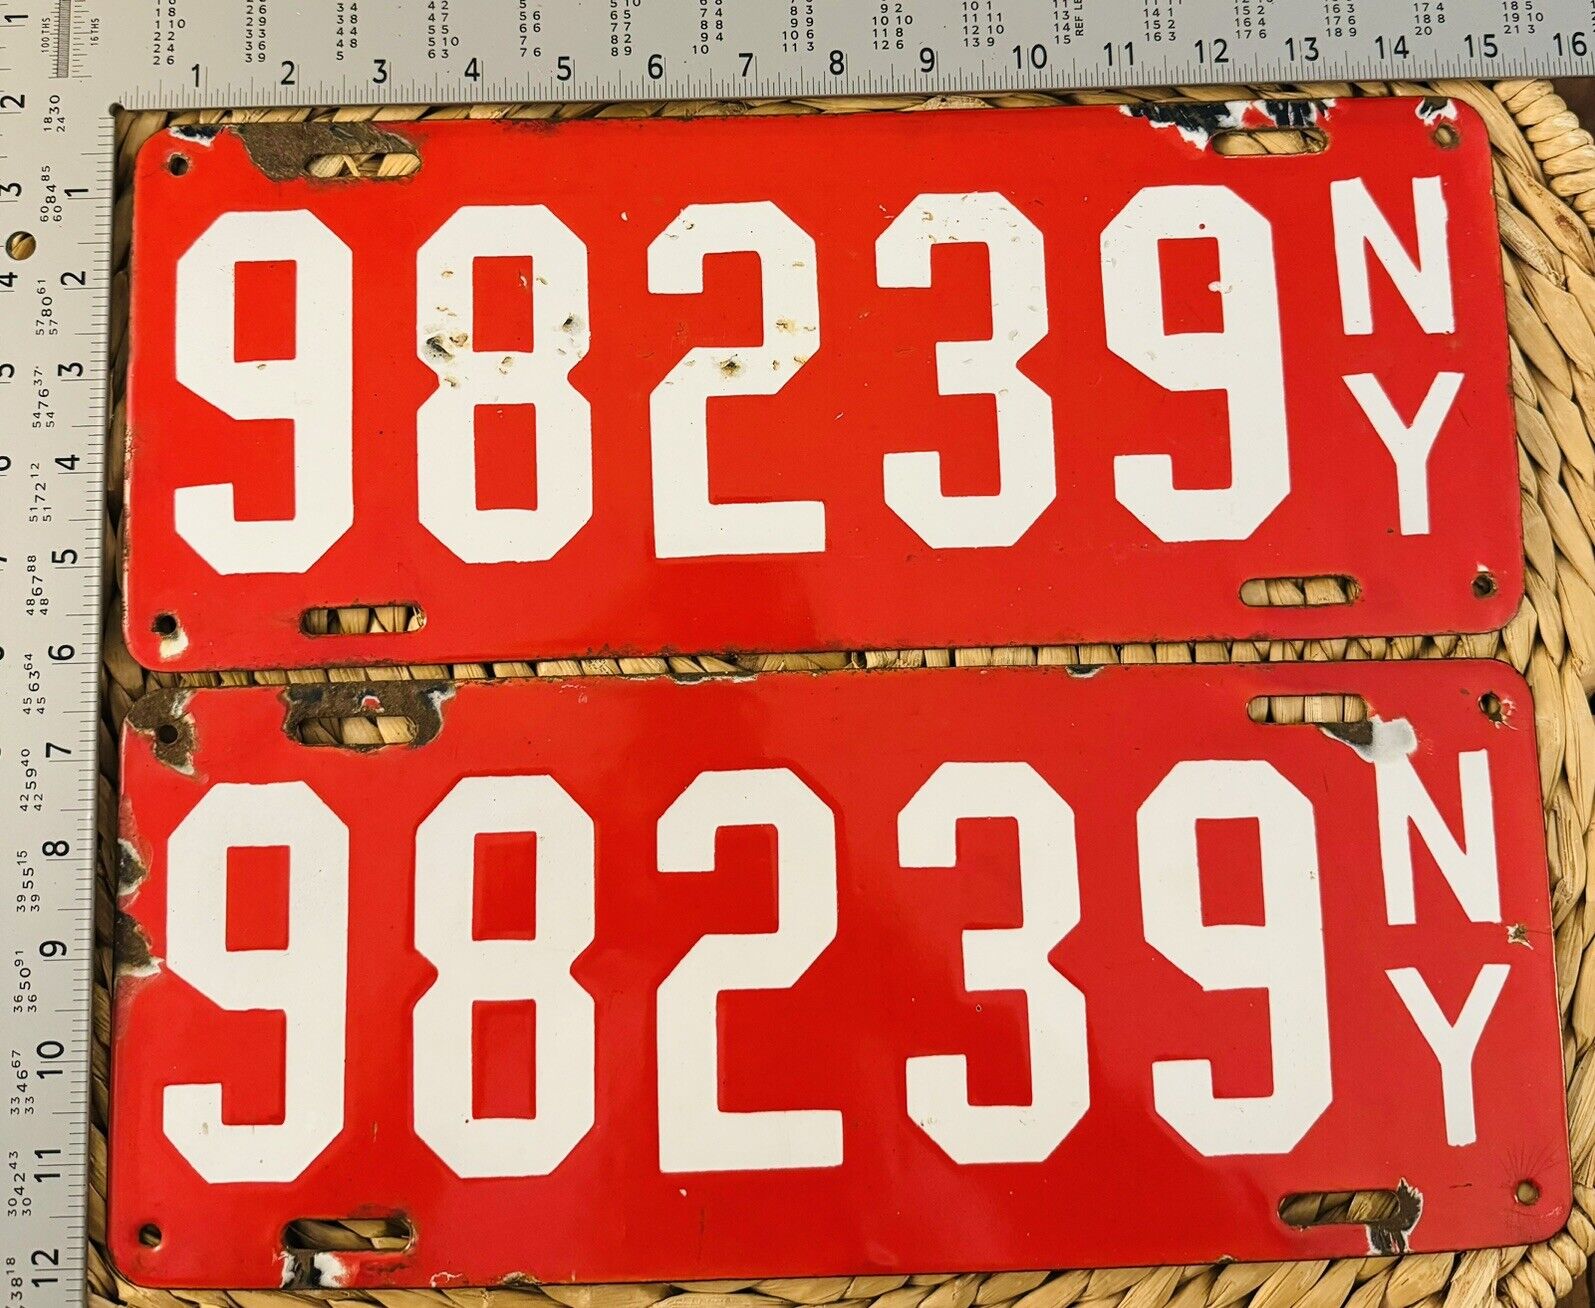 1912 New York Porcelain License Plate PAIR 98239 ALPCA STERN CONSIGNMENT